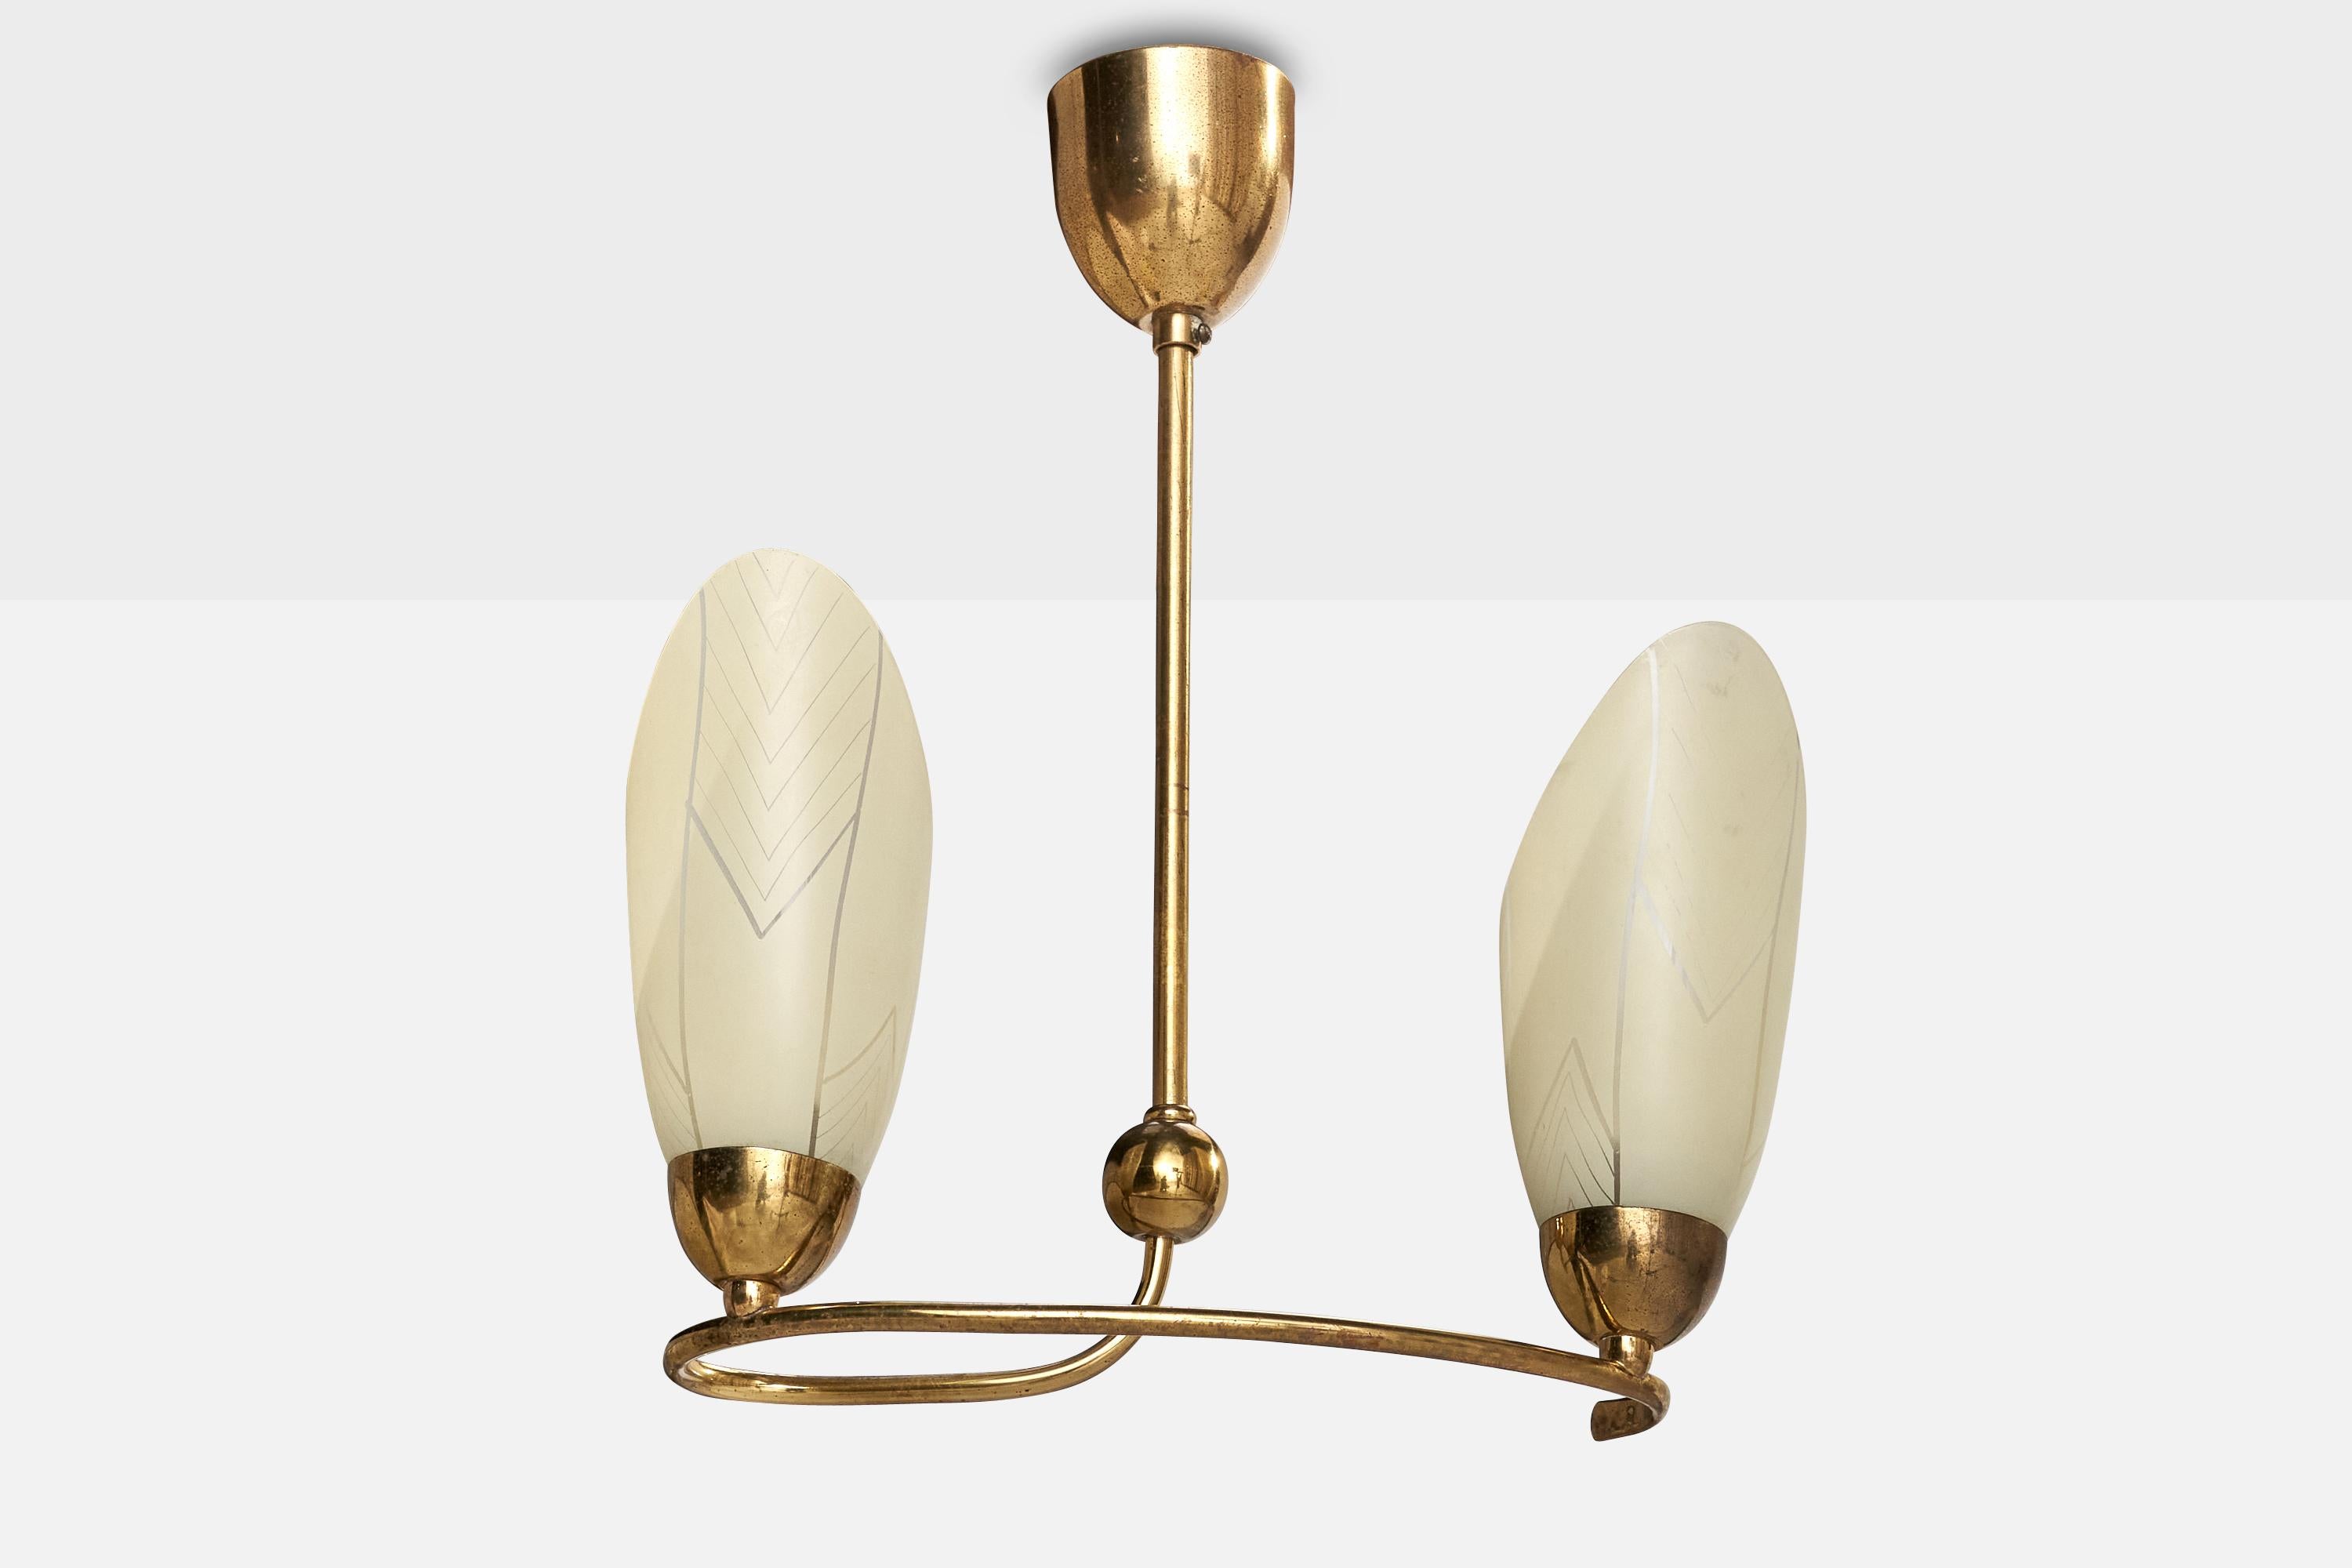 A brass and glass chandelier designed and produced in France, c. 1950s.

Dimensions of canopy (inches): 2.79” H x 2.9” Diameter
Socket takes standard E-14 bulbs. 2 socket.There is no maximum wattage stated on the fixture. All lighting will be